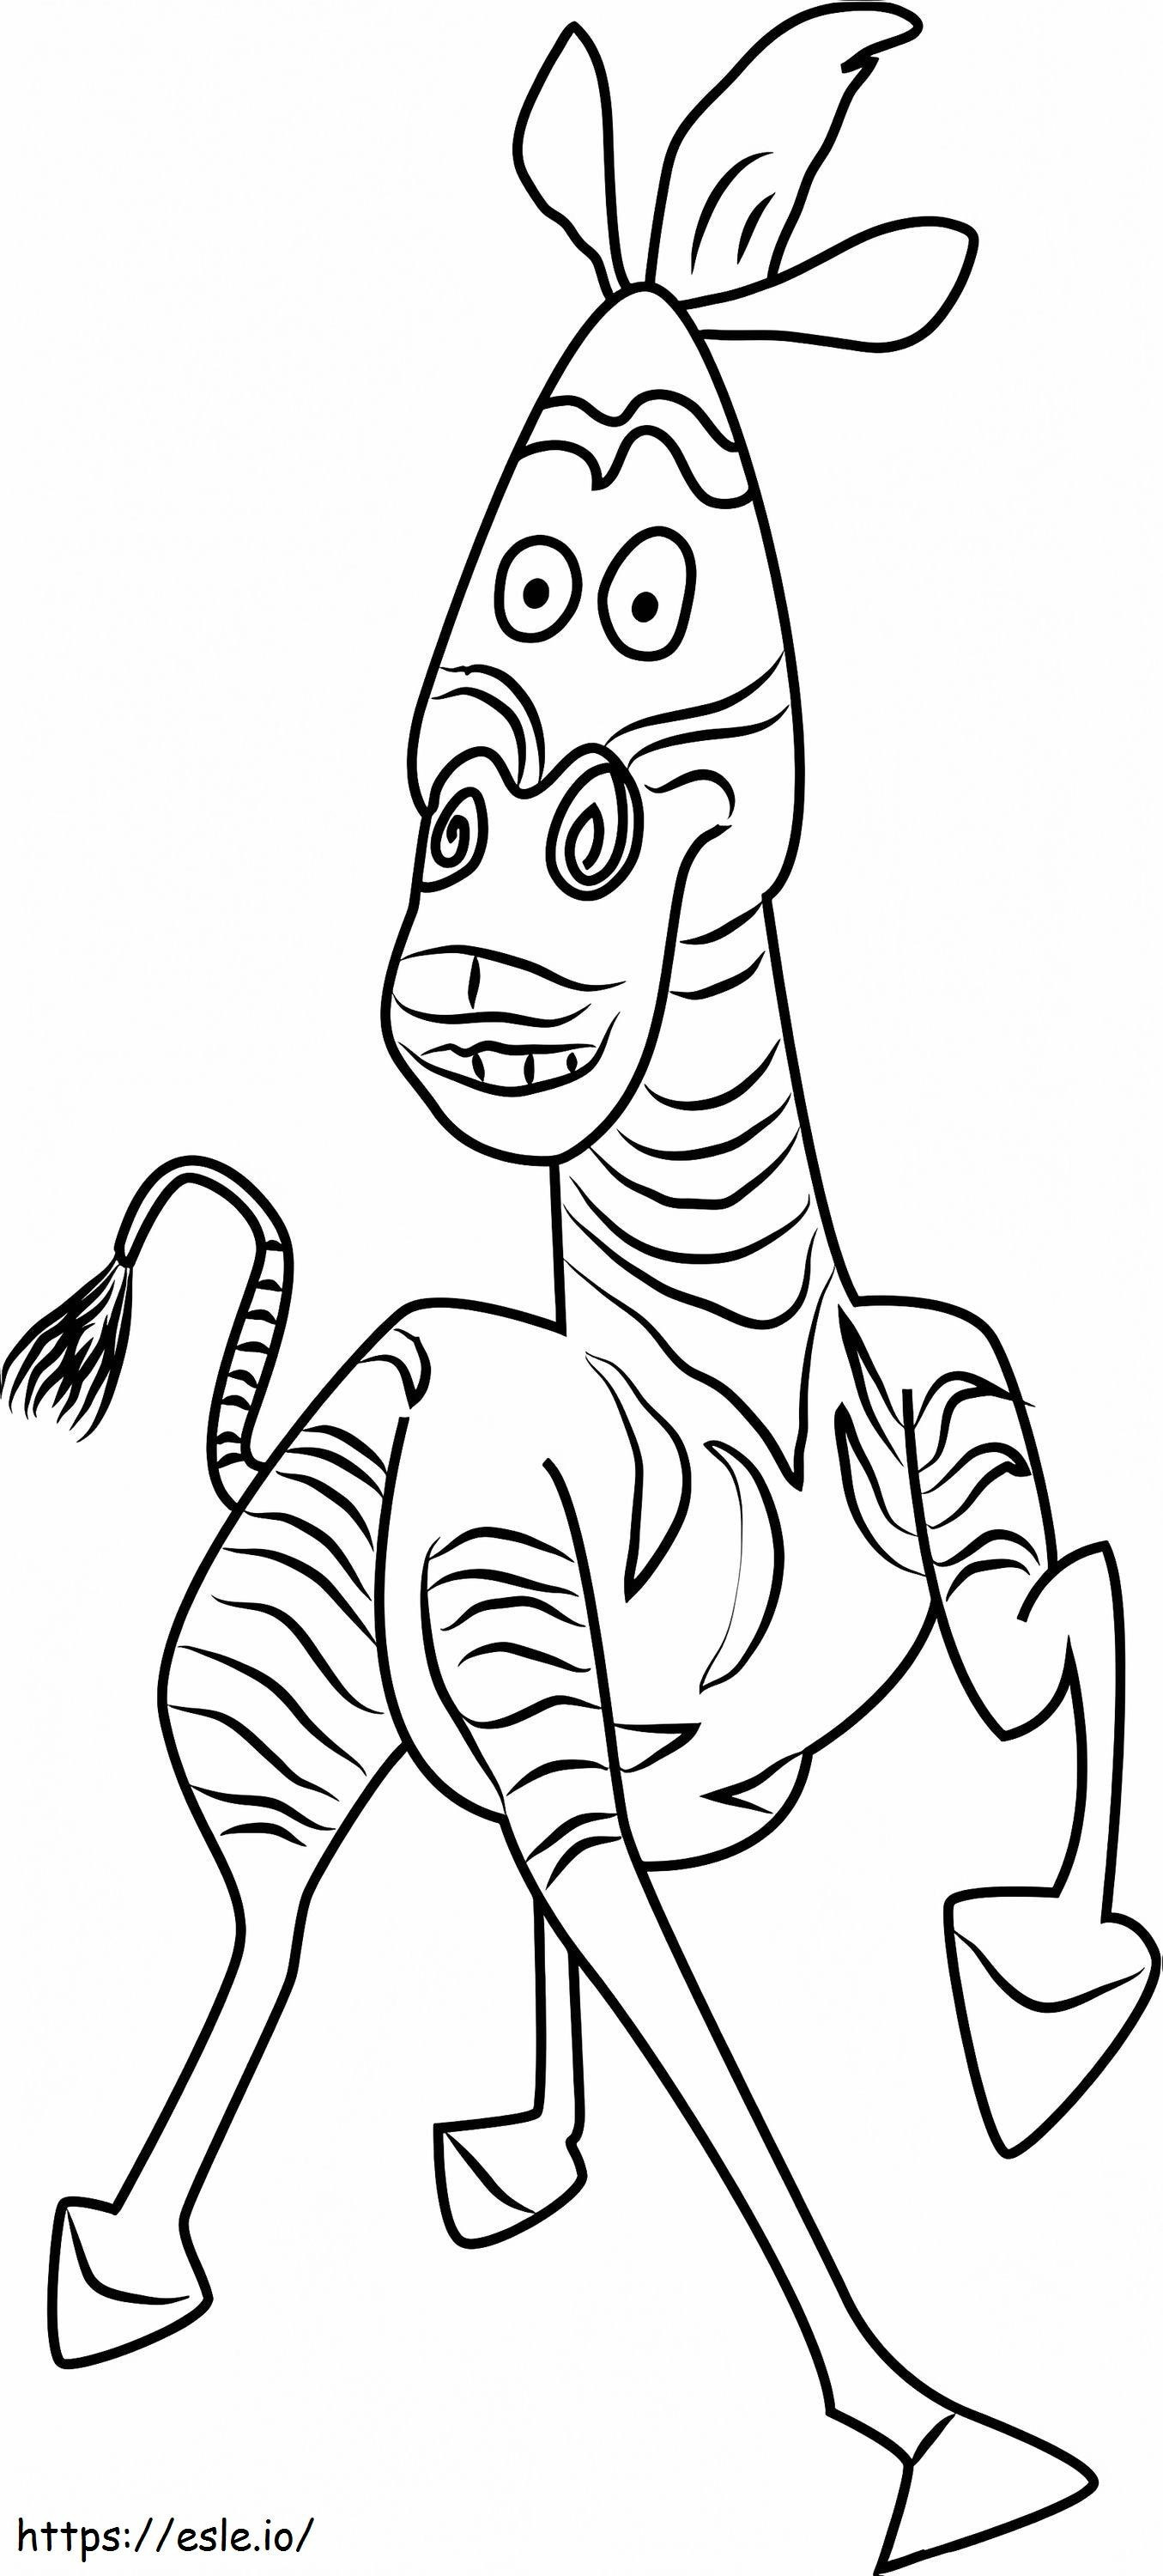 1532575475 Marty From Madagascar A4 coloring page